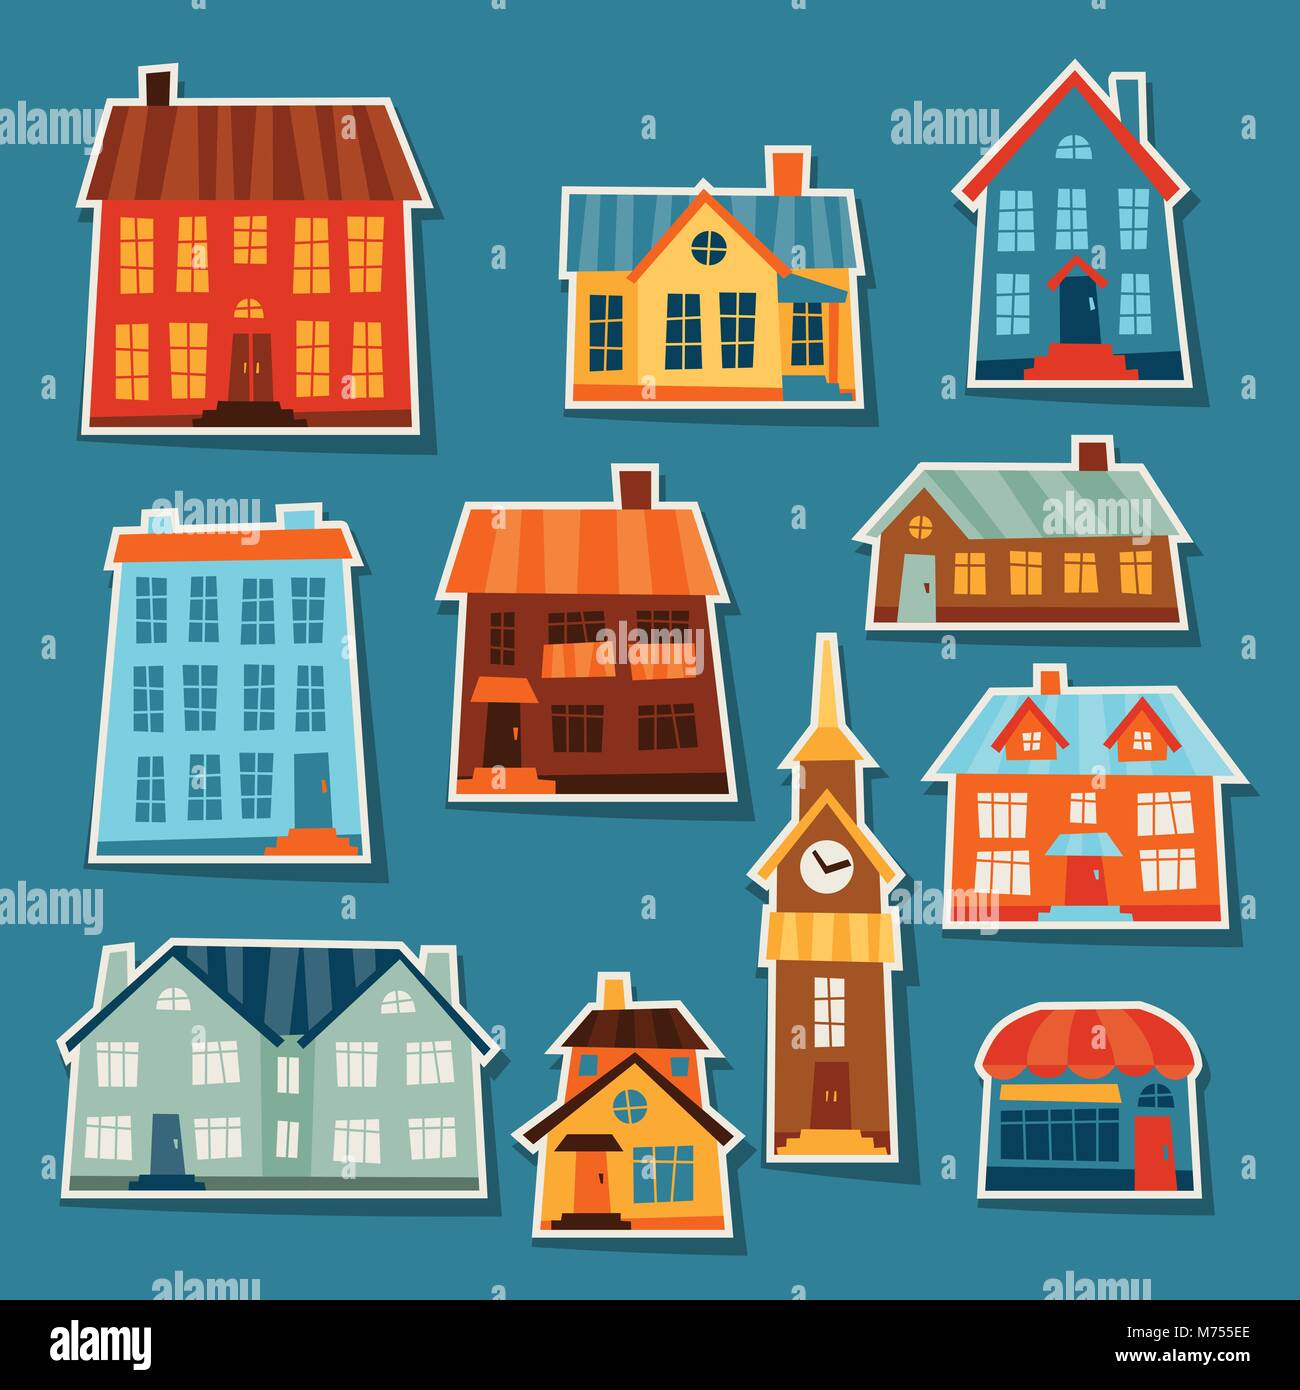 Town icon set of cute colorful houses Stock Vector